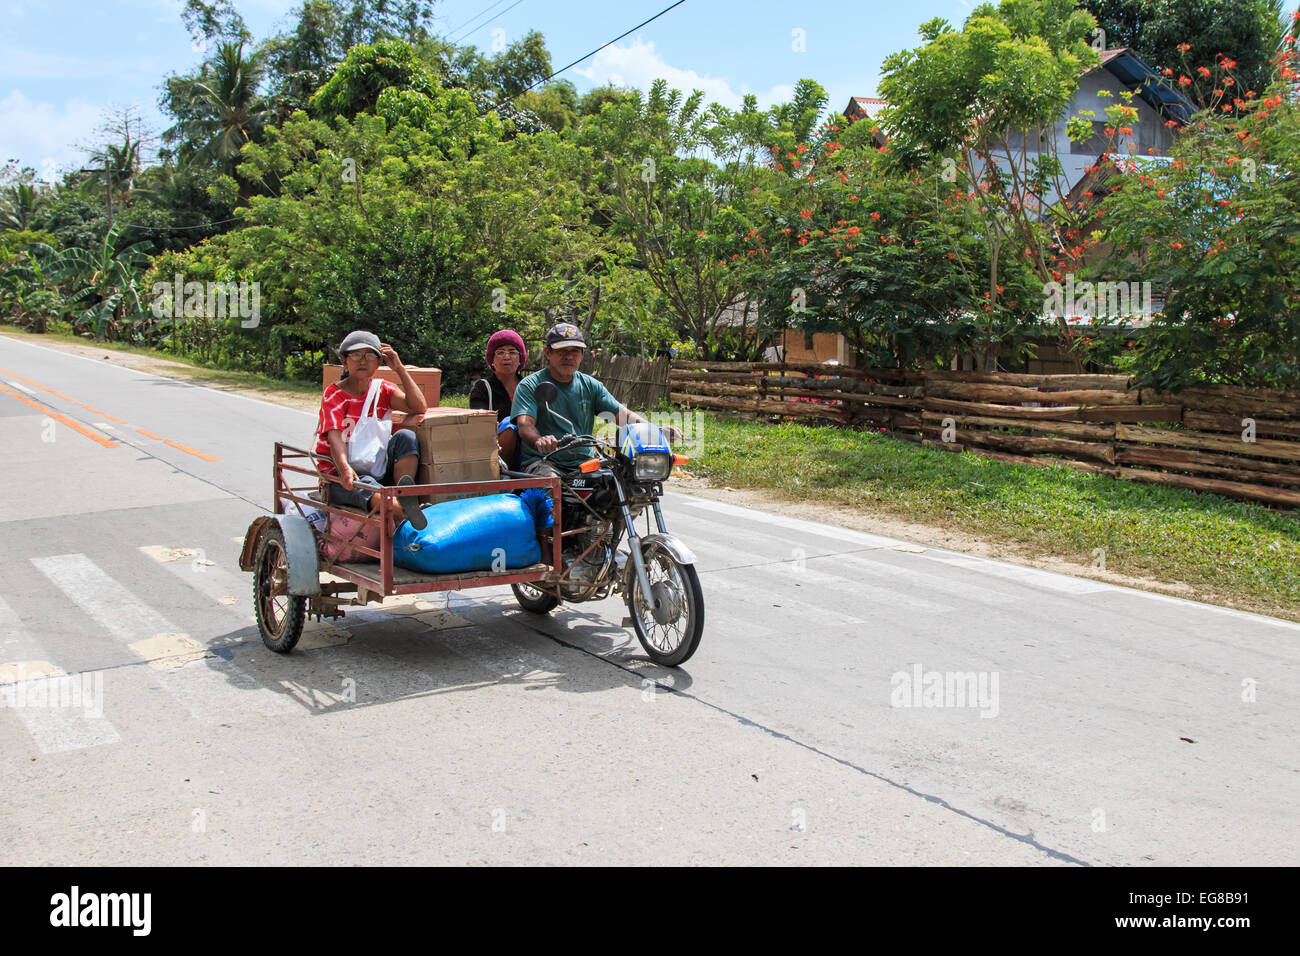 Puerto Princesa, Philippines - January 12,2015: Three people on a tricycle in the Philippines Stock Photo